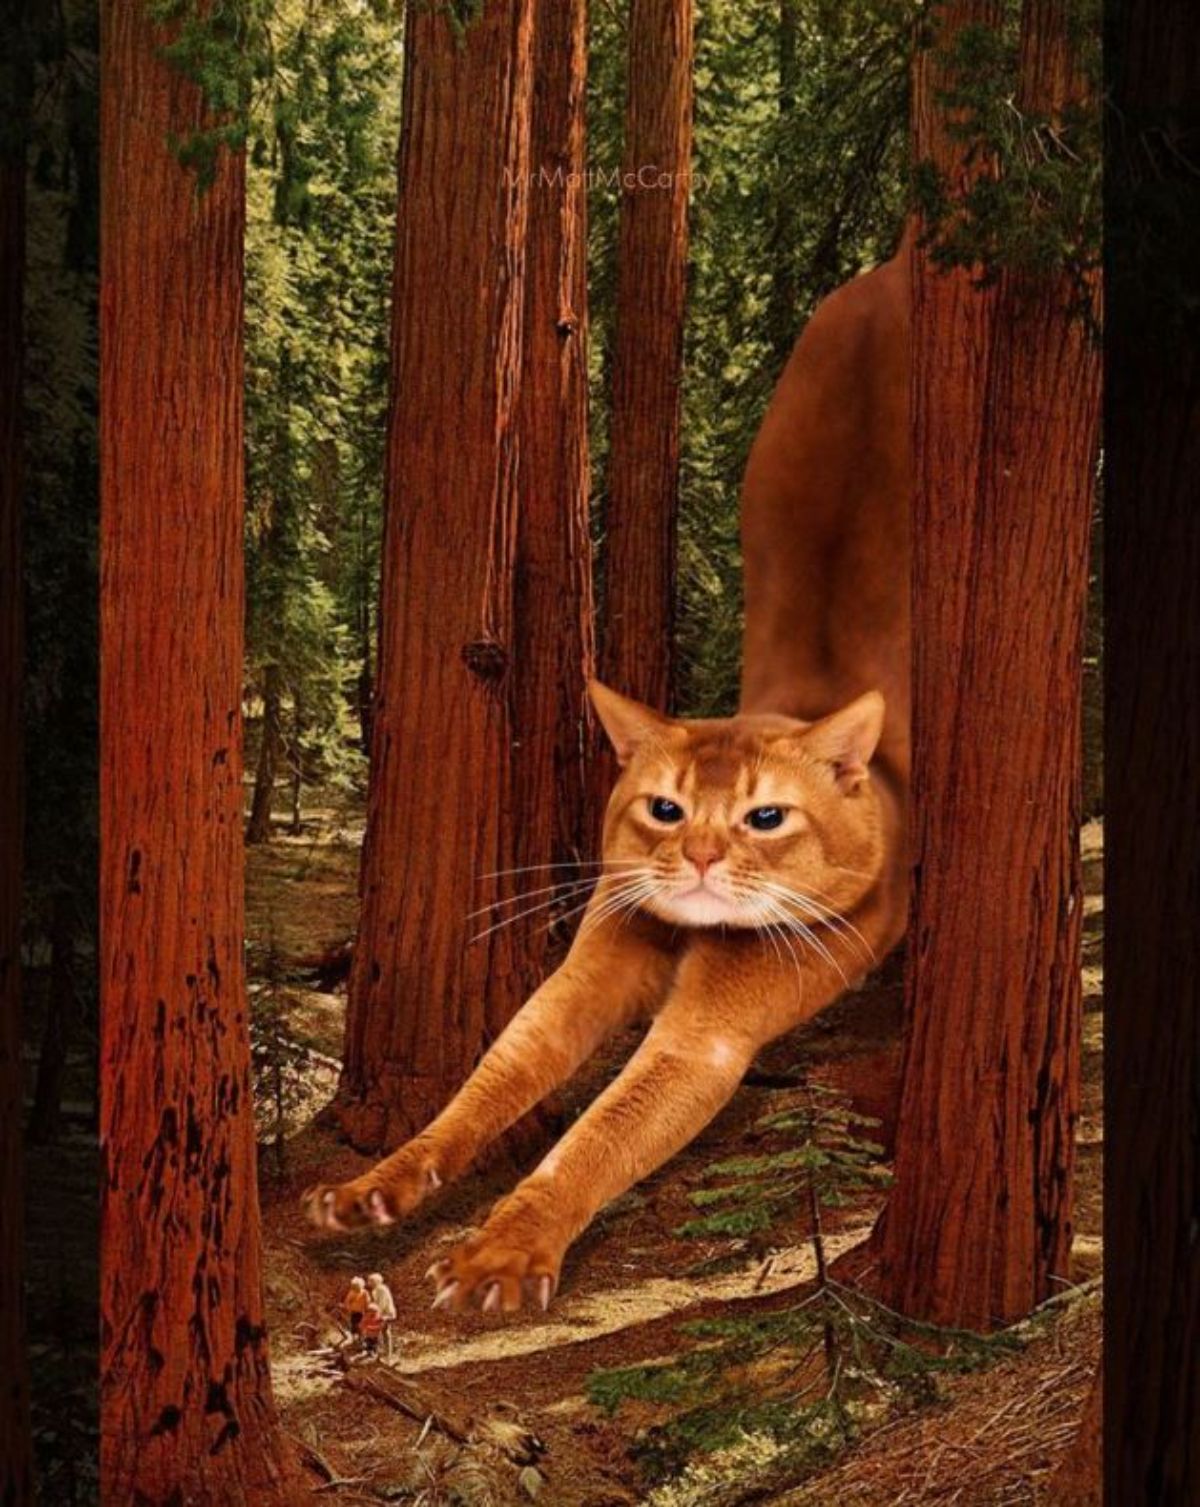 large photoshopped orange cat stretching in a forest surrounded by tall trees